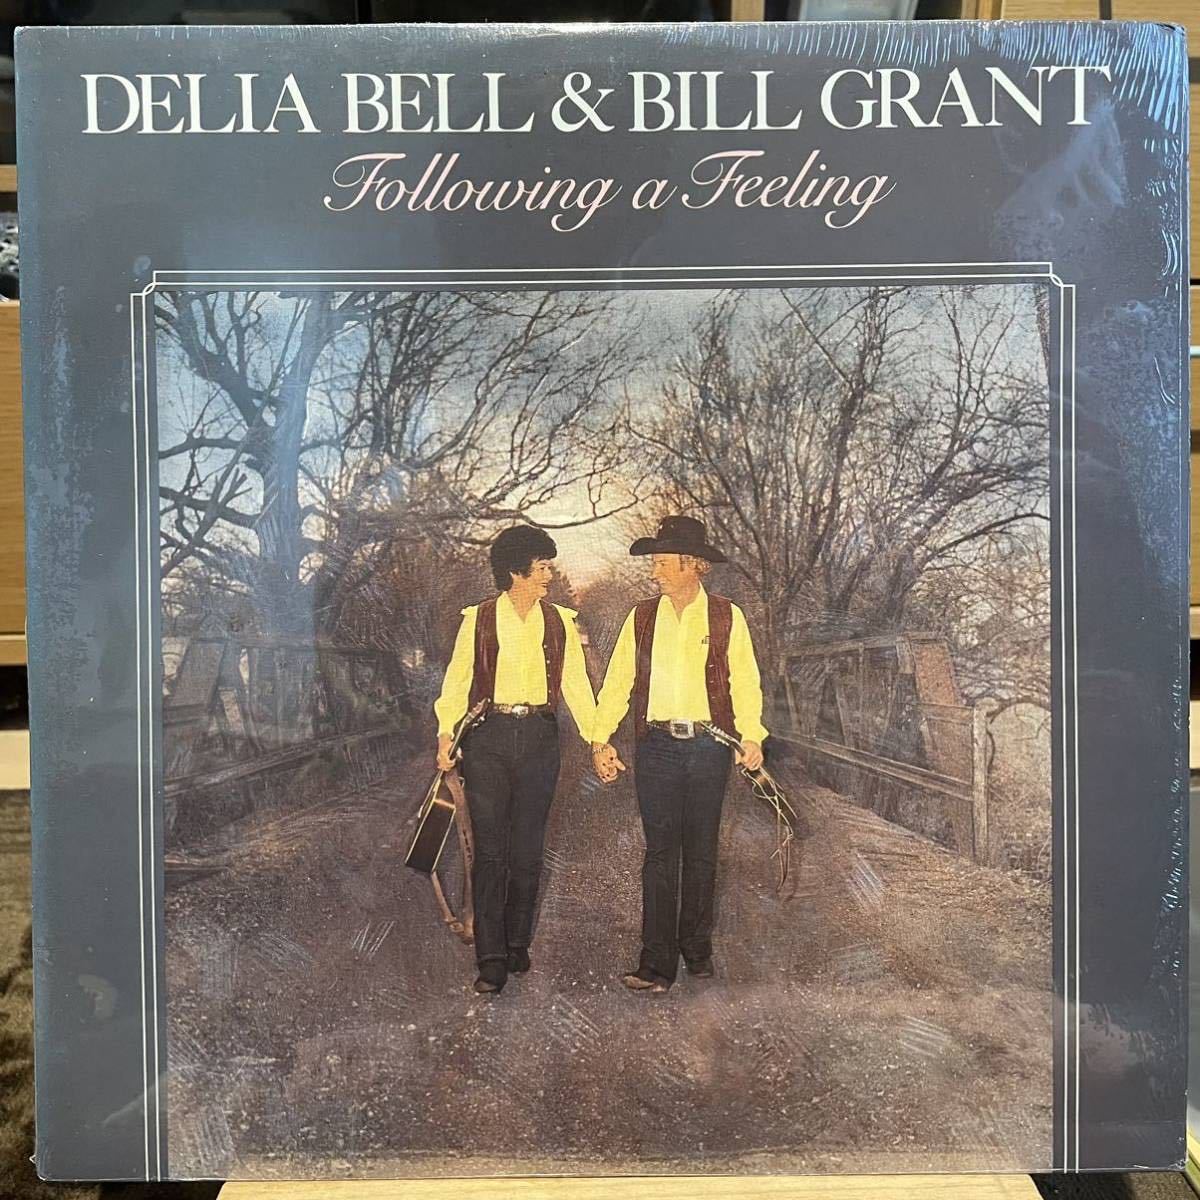 【US盤Org.】Delia Bell & Bill Grant Following A Feeling (1988) Rounder Records 0257 シュリンク Bluegrass_画像1